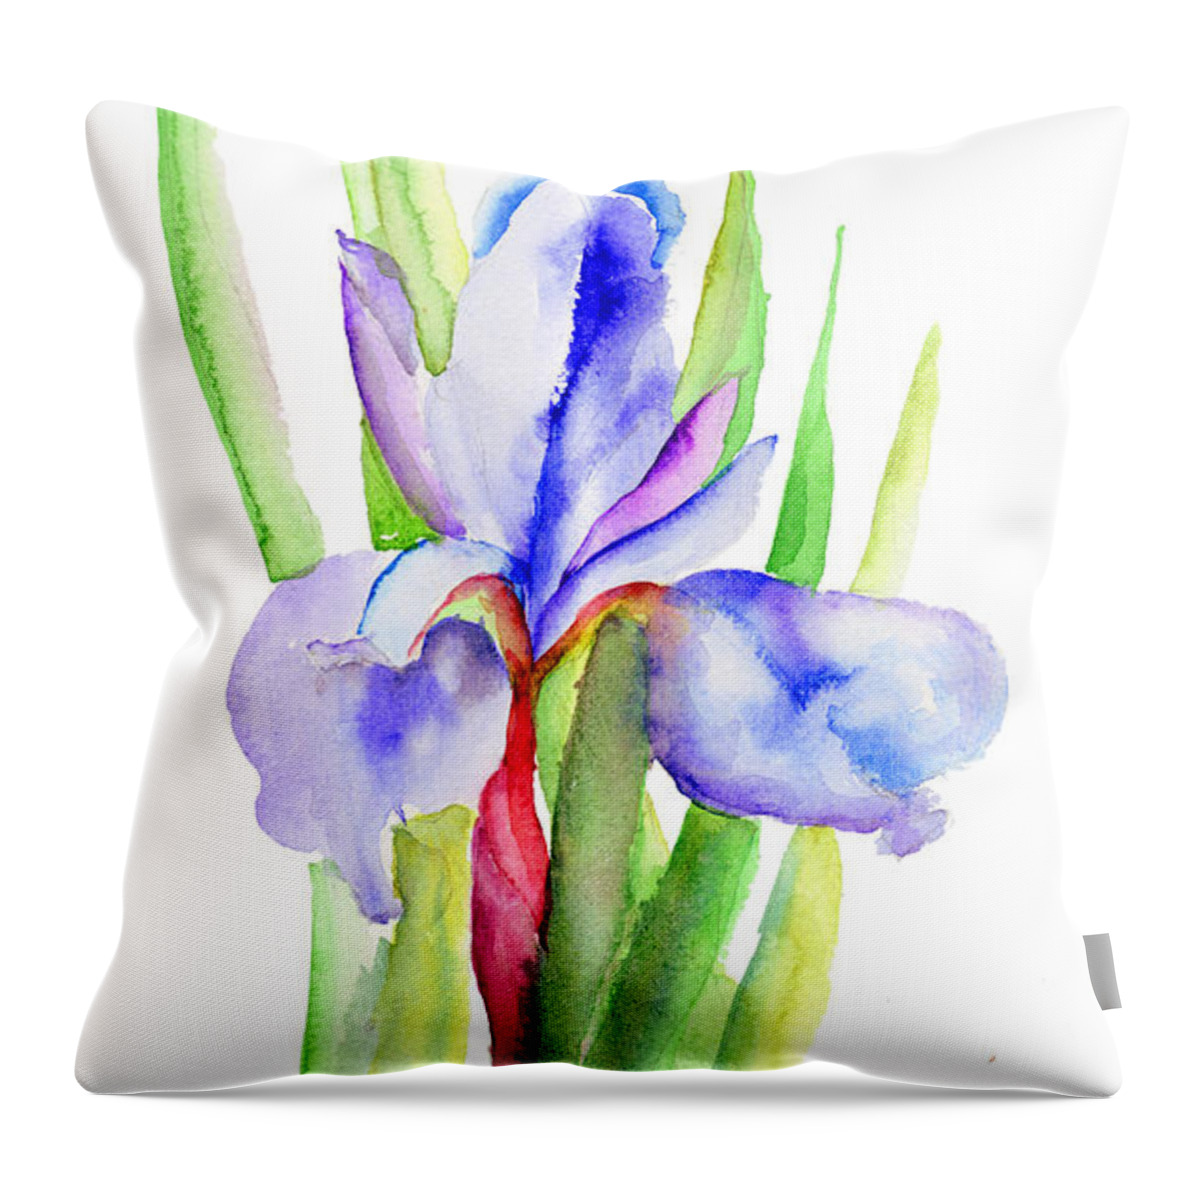 Backdrop Throw Pillow featuring the painting Iris flowers by Regina Jershova